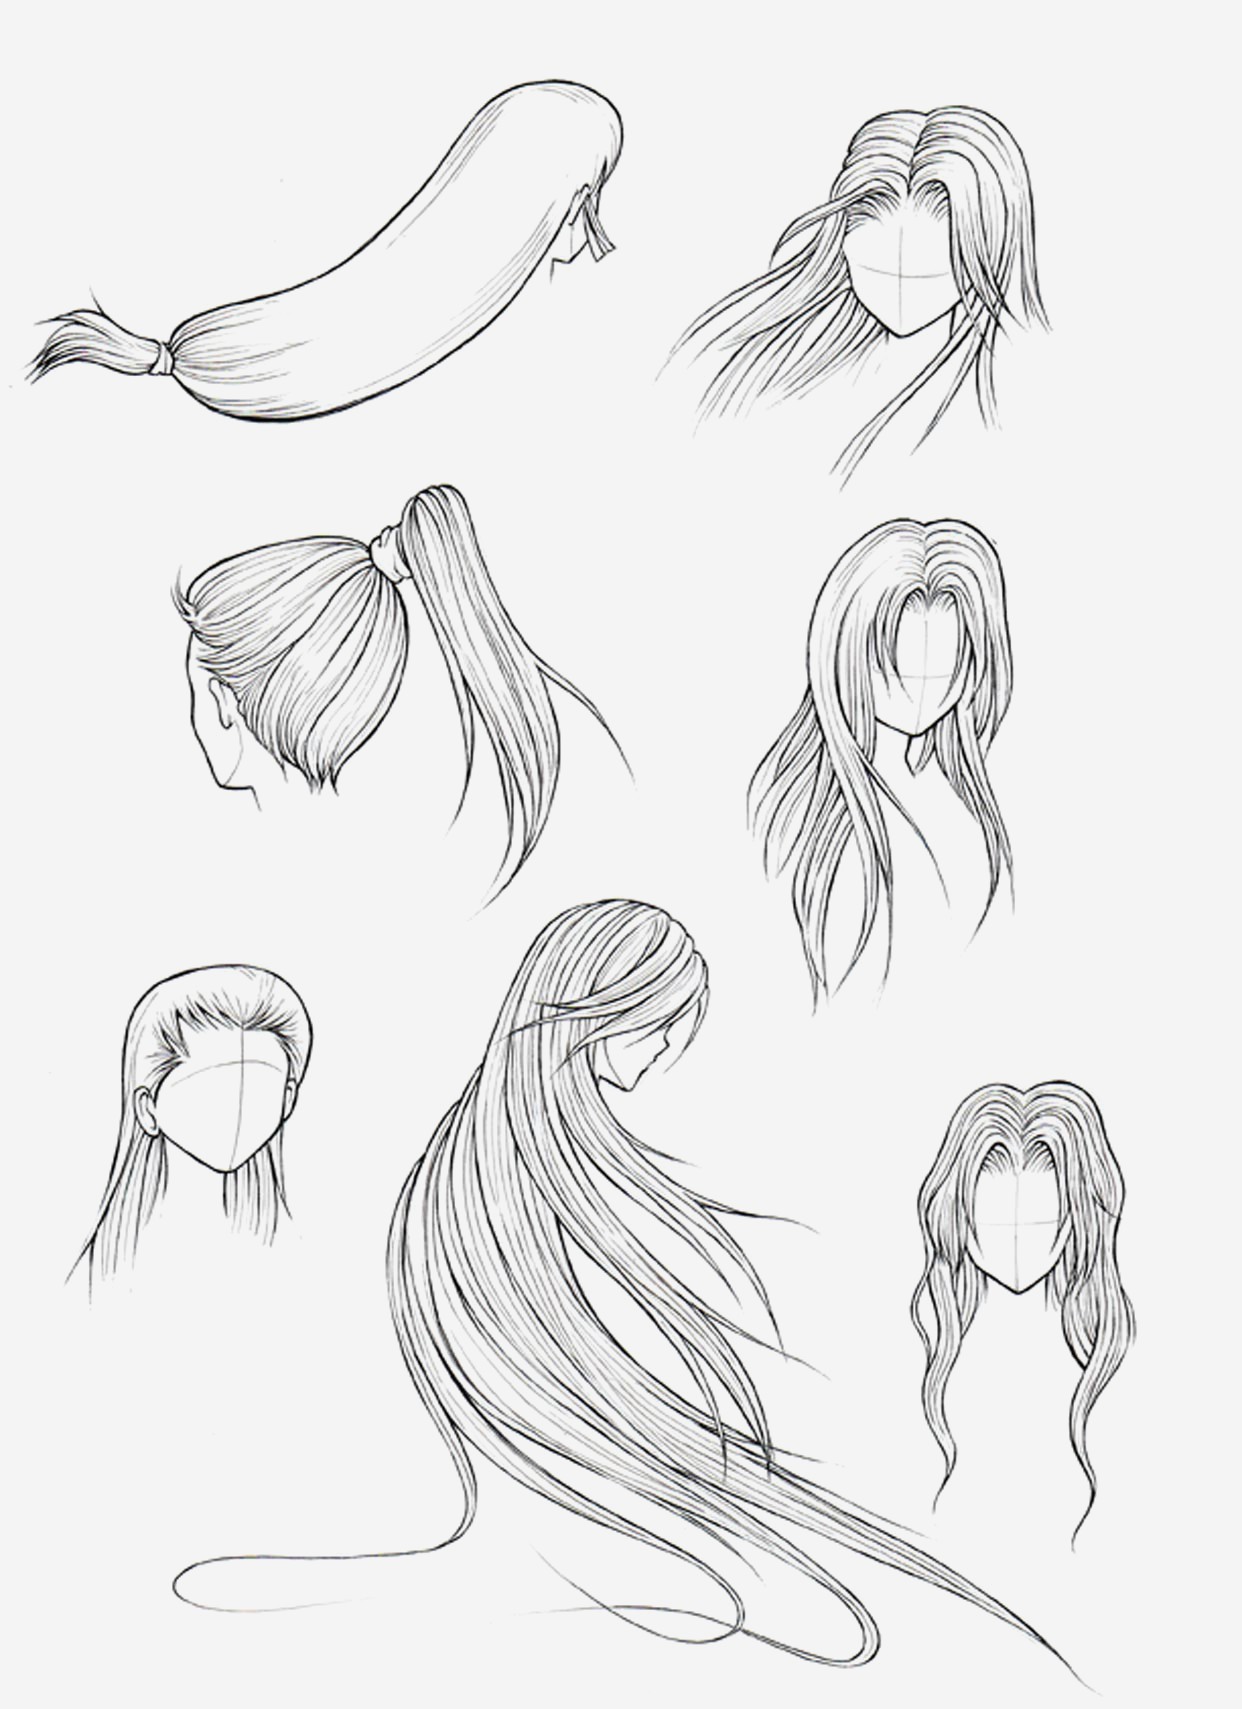 Anime Hairstyles Drawing at GetDrawings.com | Free for ...